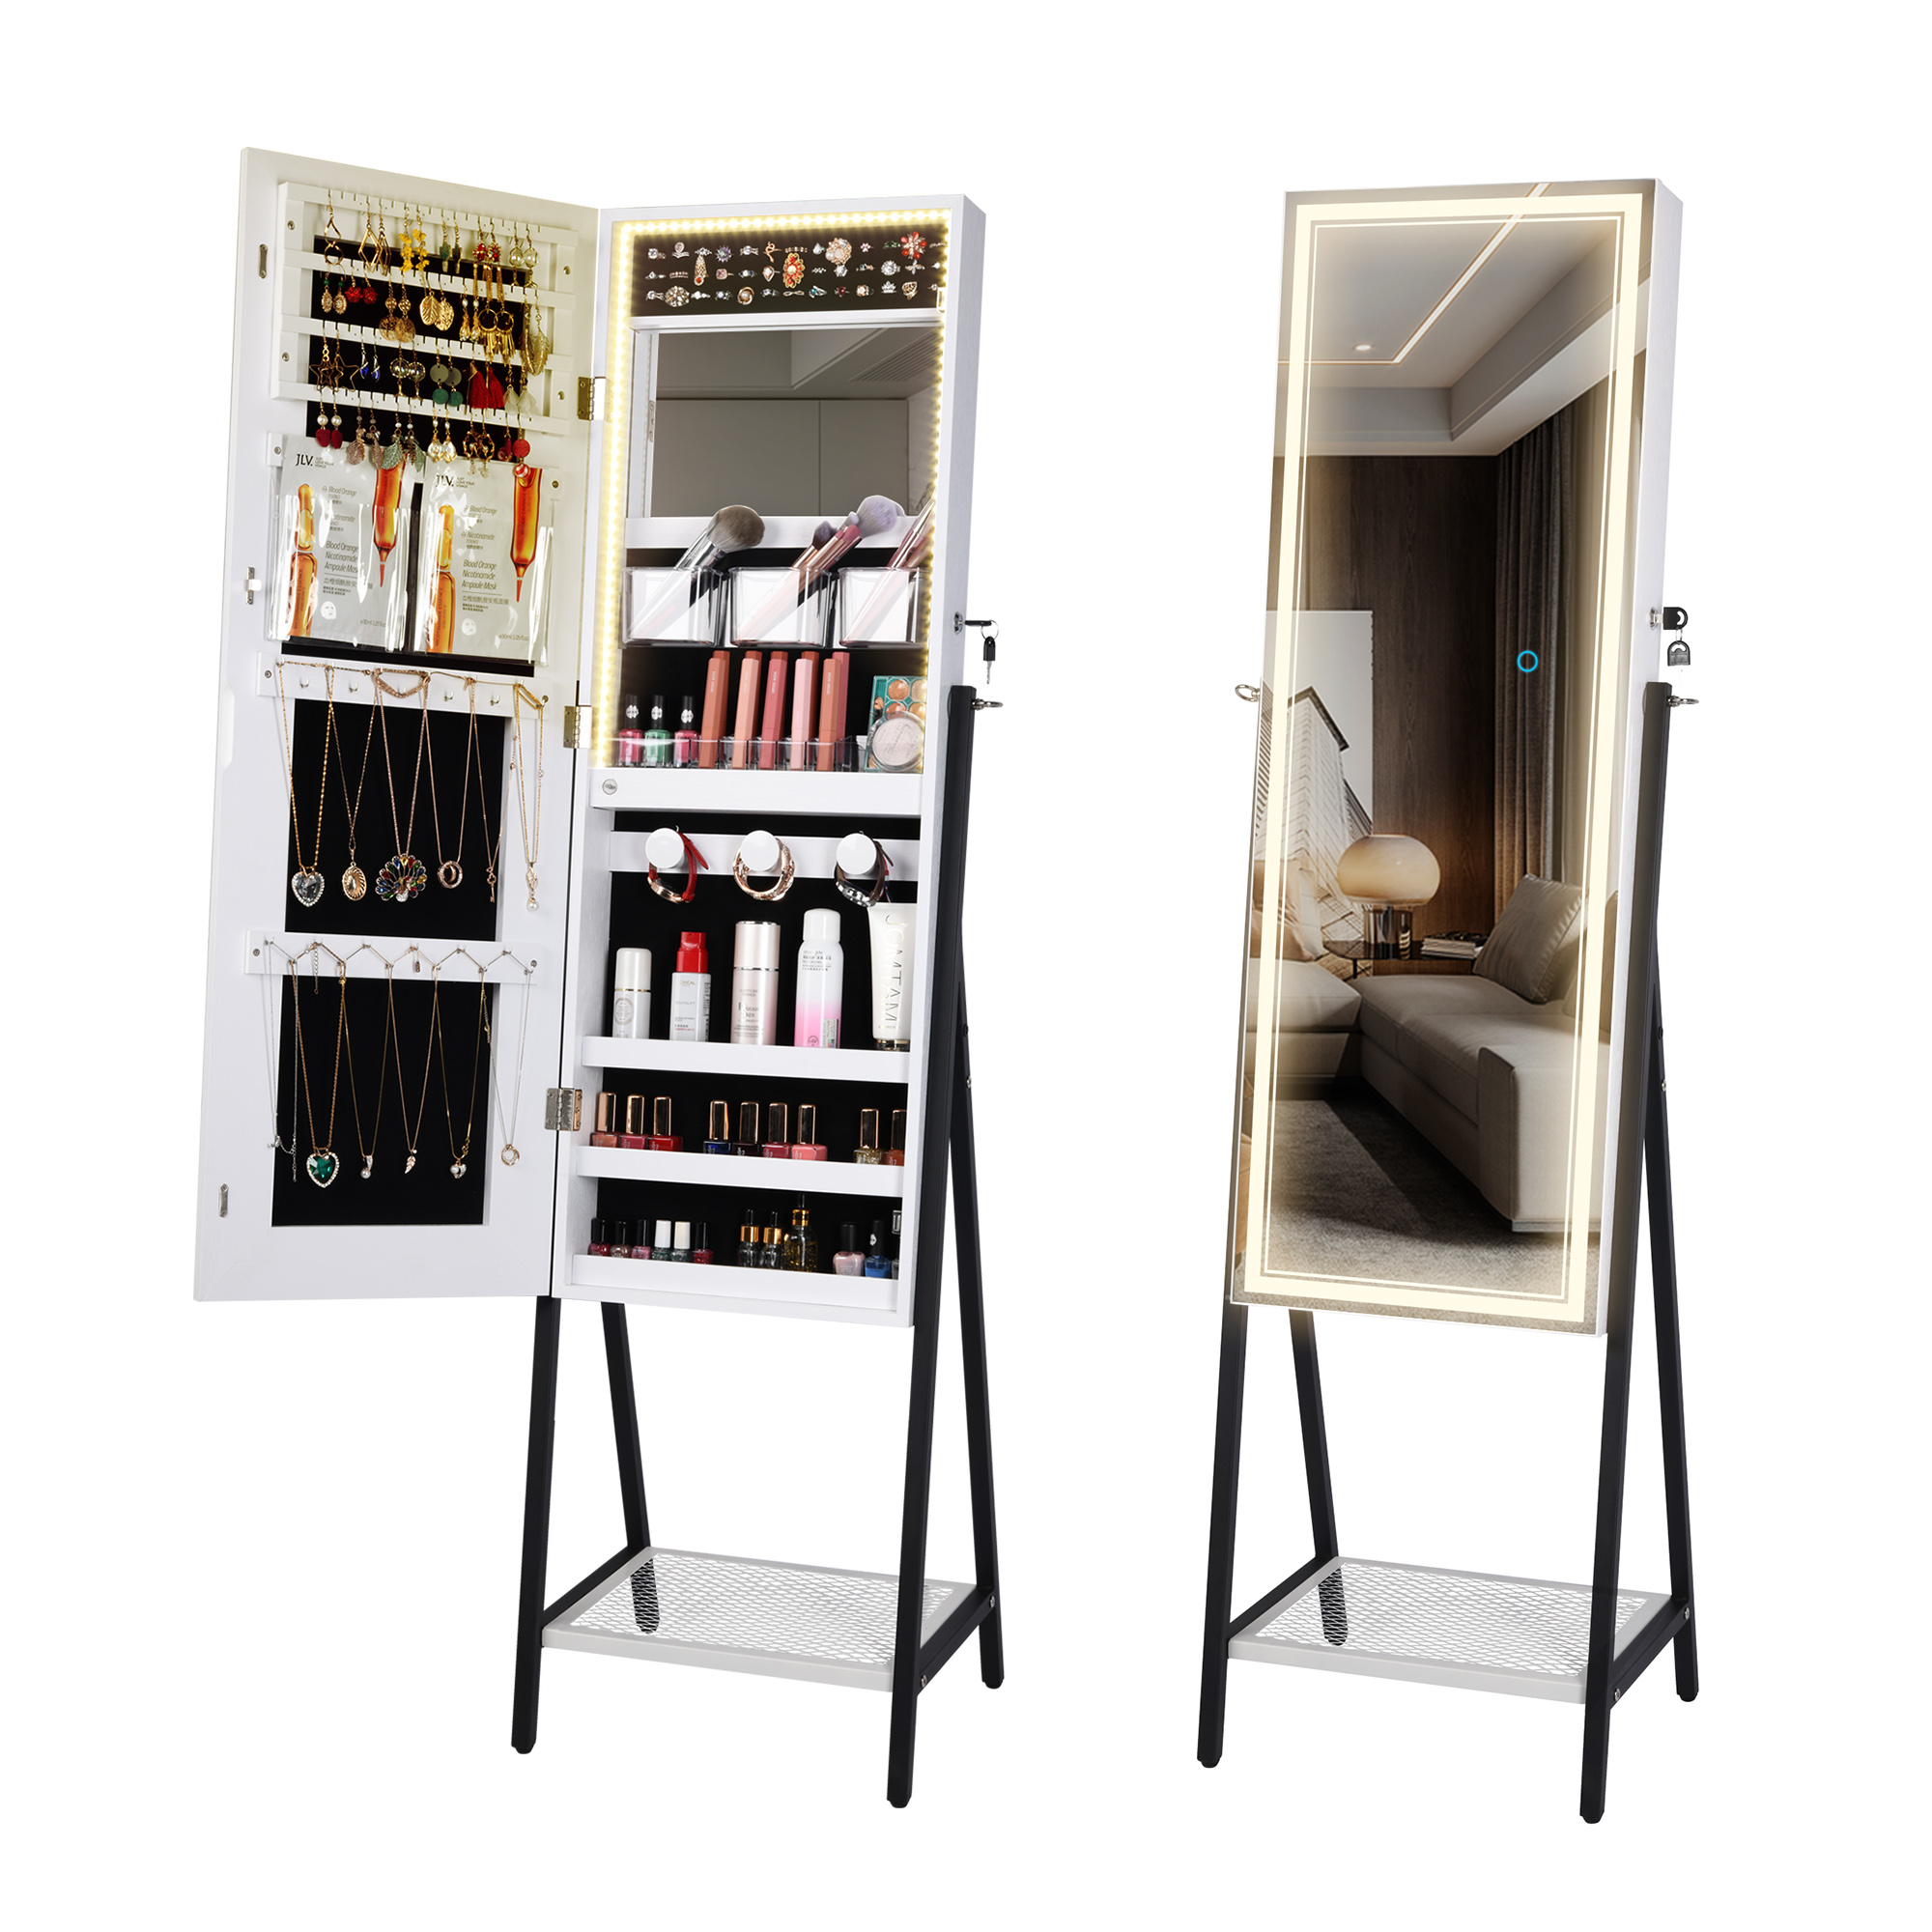 LVSOMT Standing Jewelry Cabinet Makeup Mirror with Led Light Full Body Mirrors